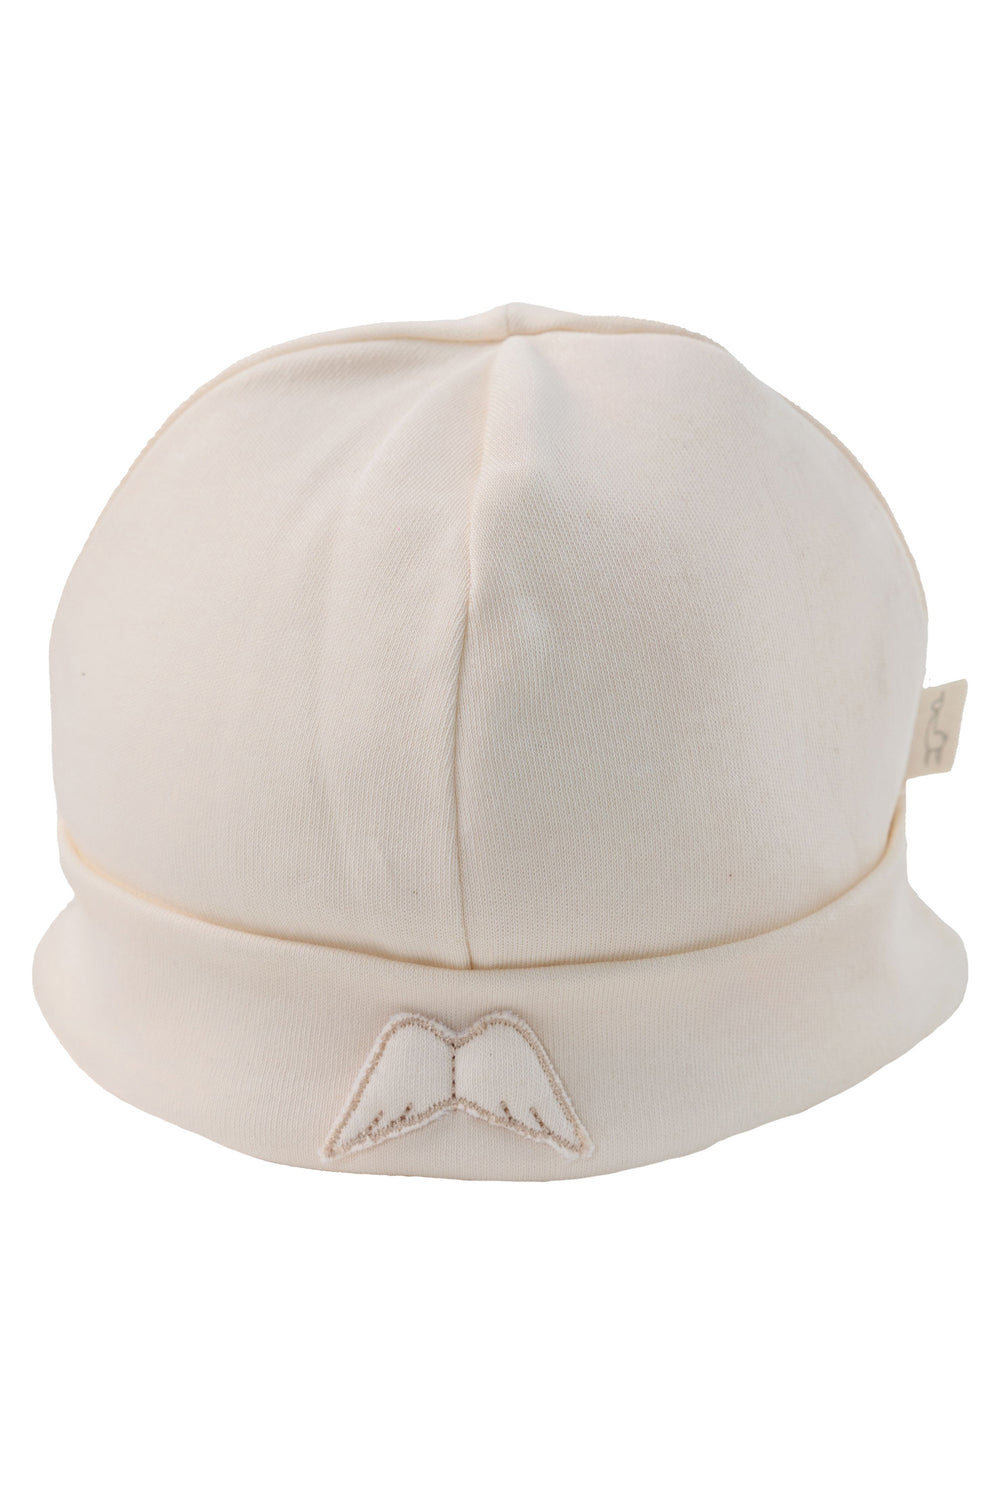 Baby Gi Angel Wing Cotton Beanie Hat | Millie and John